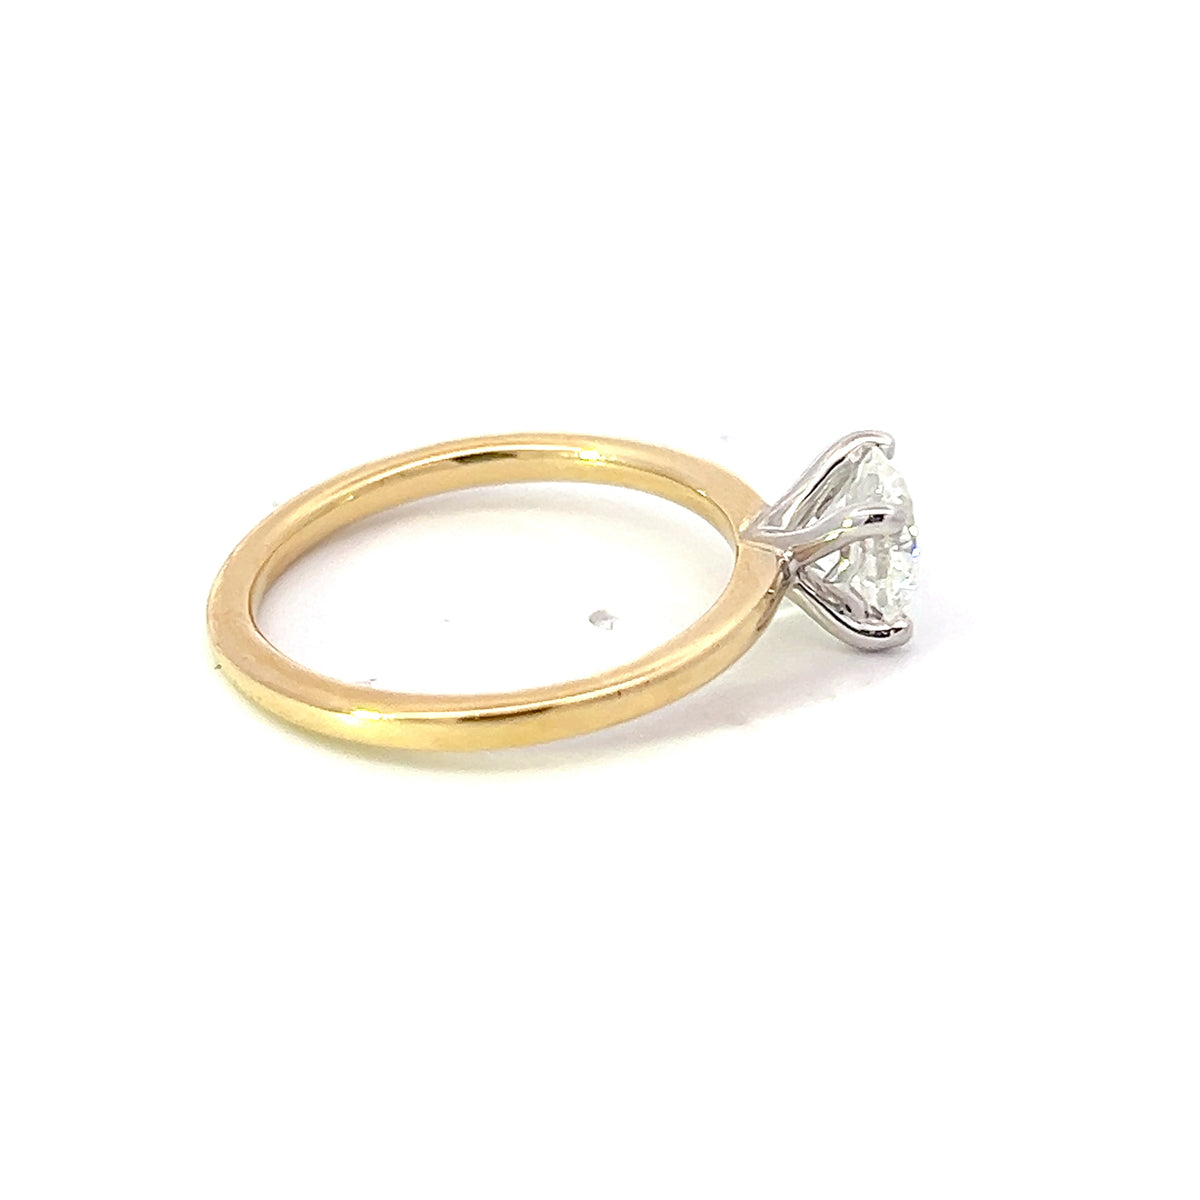 14K Yellow Gold 1.01cttw Round Brilliant Cut Canadian Diamond Engagement Ring